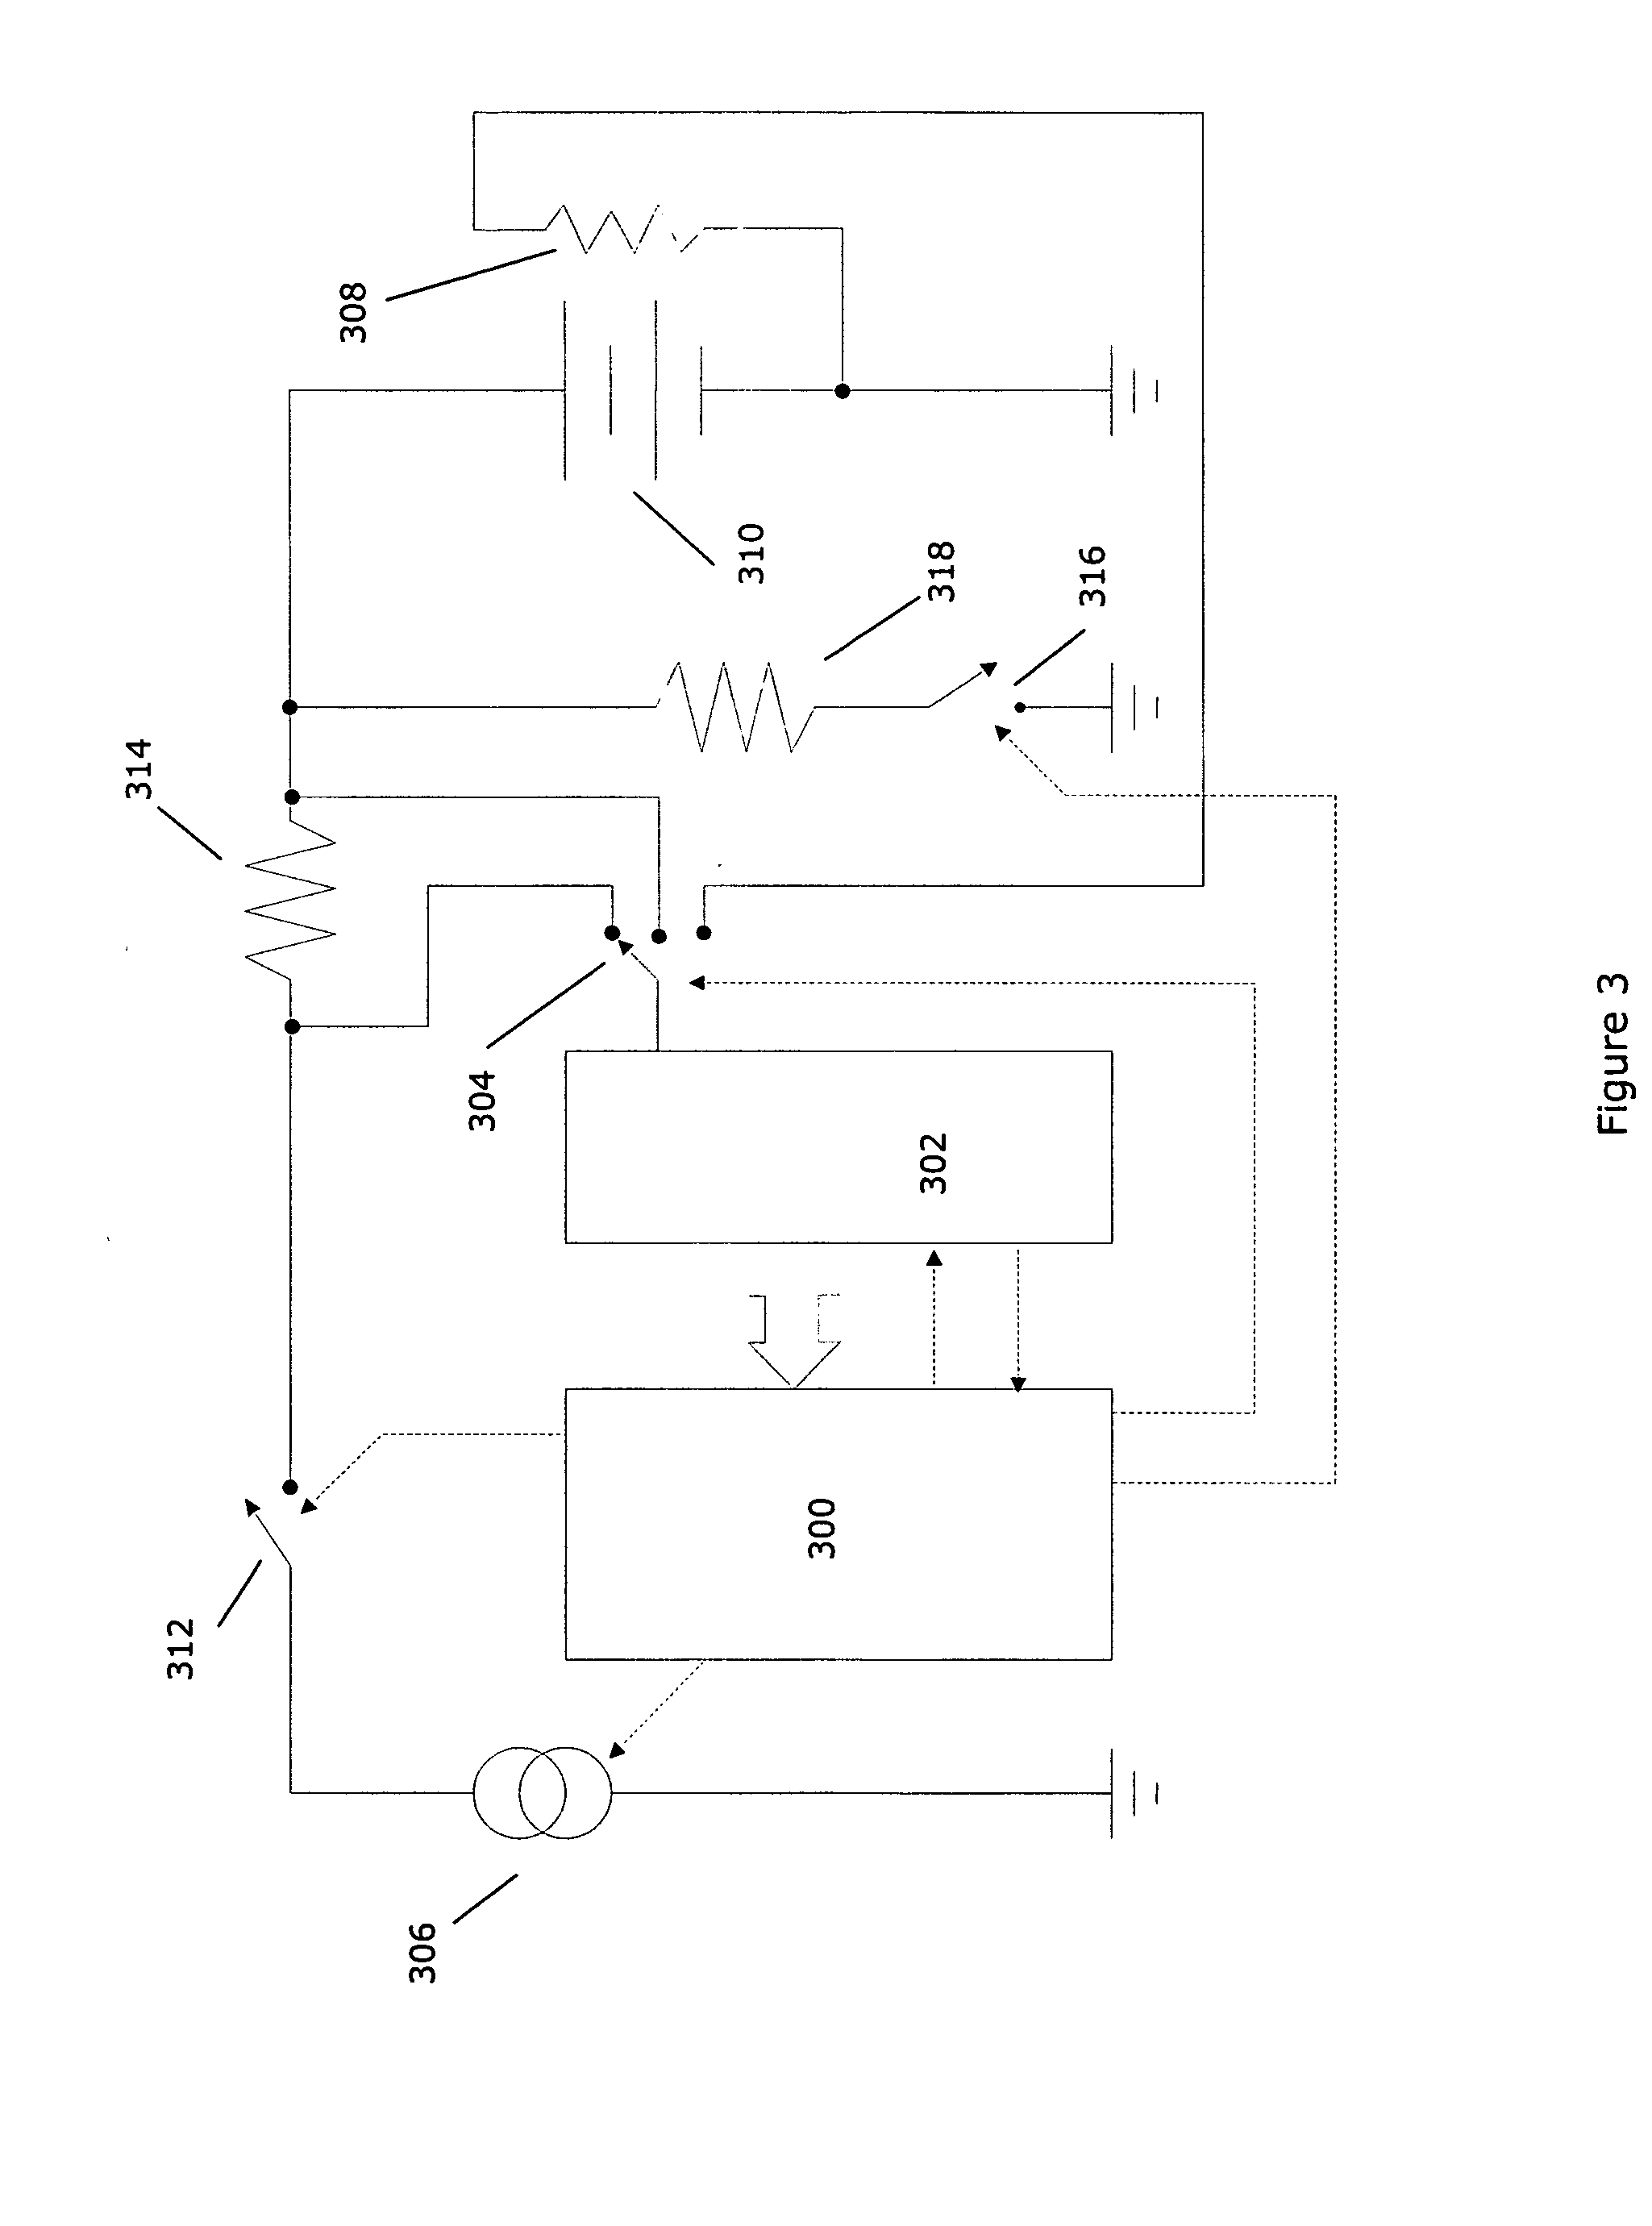 Method of charging a battery